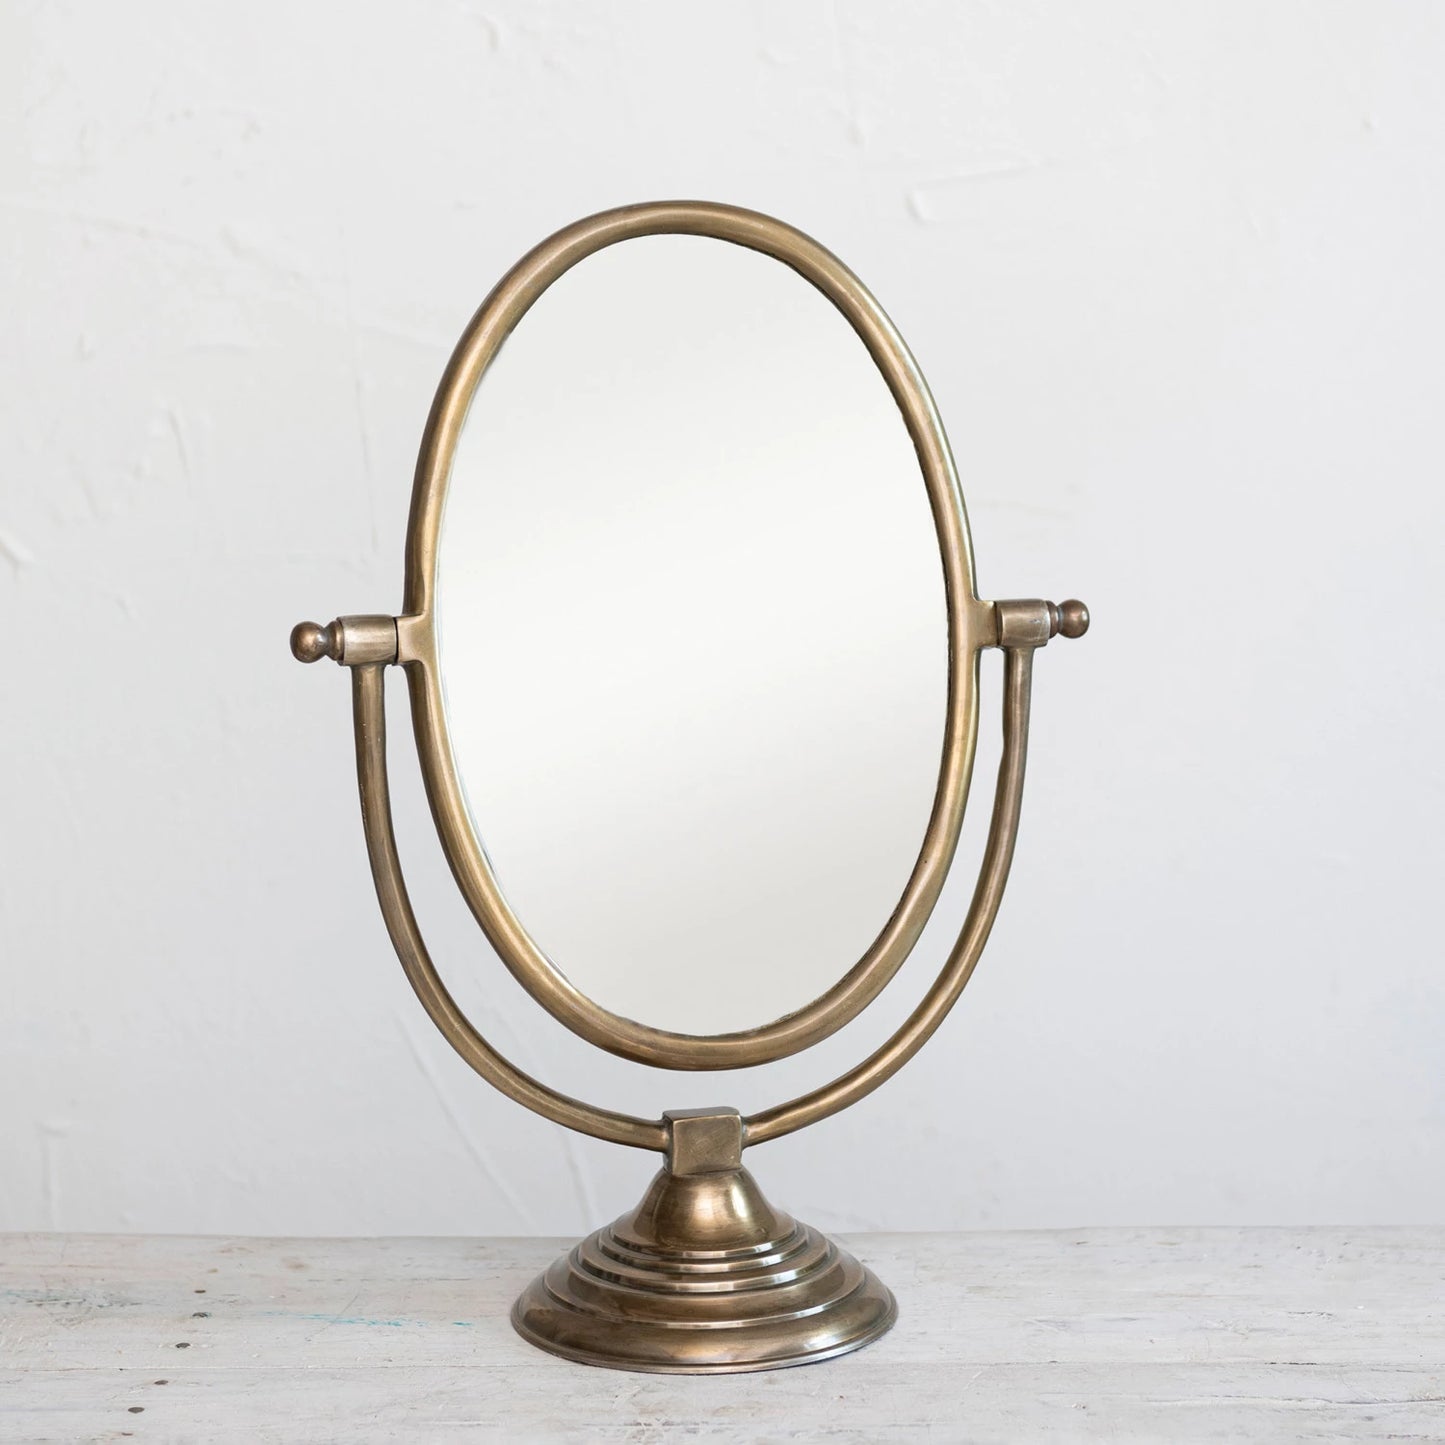 Antique Brass Mirror, The Feathered Farnhouse